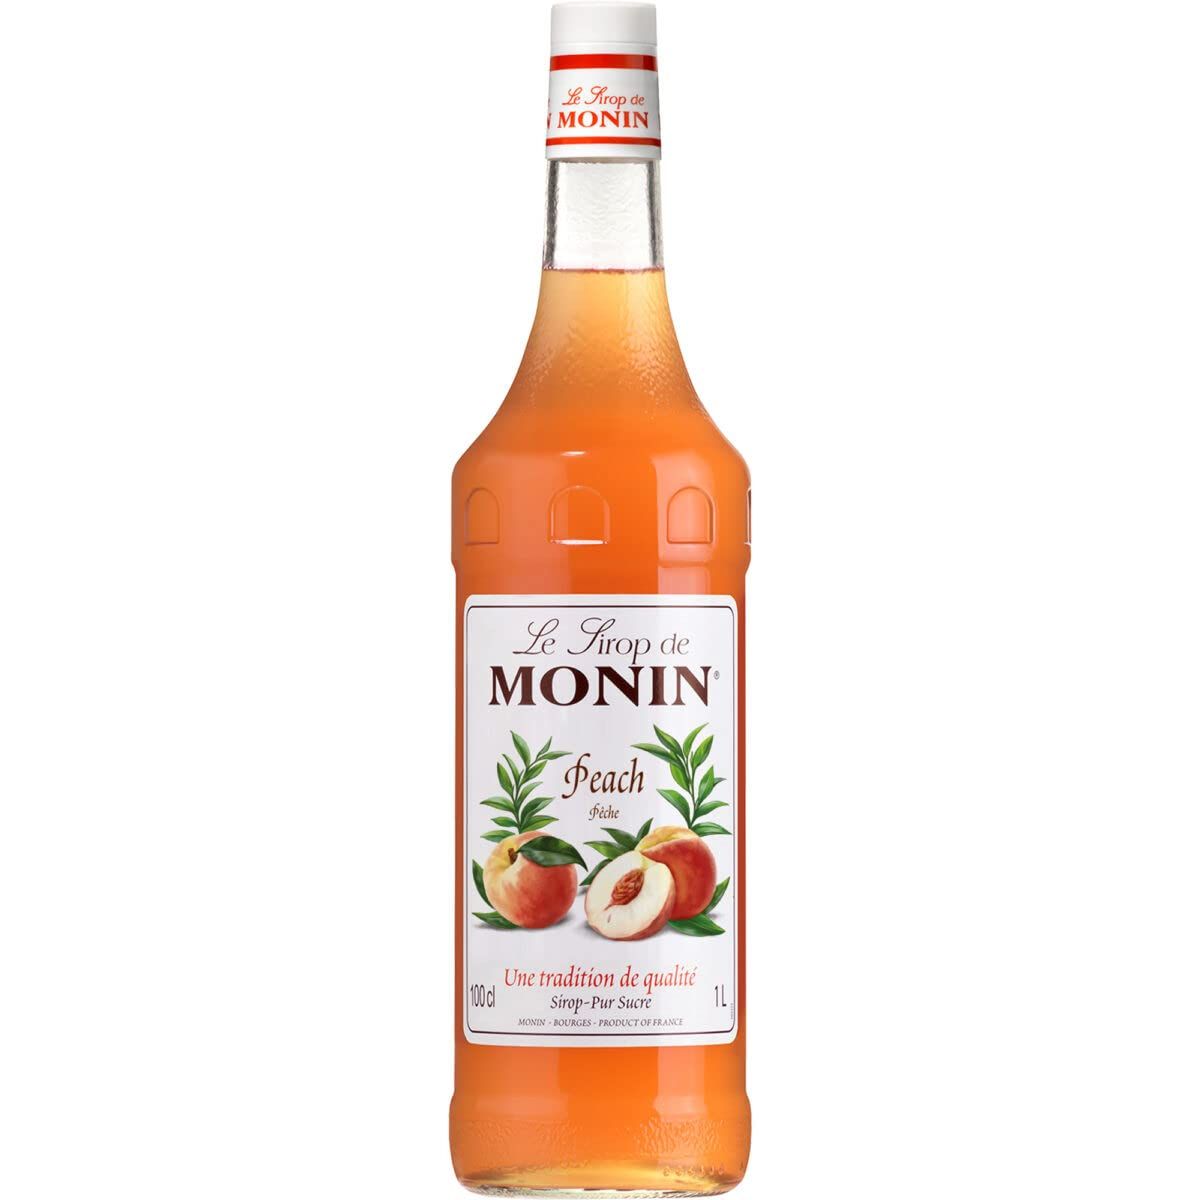 MONIN Peach Flavored Syrup Image